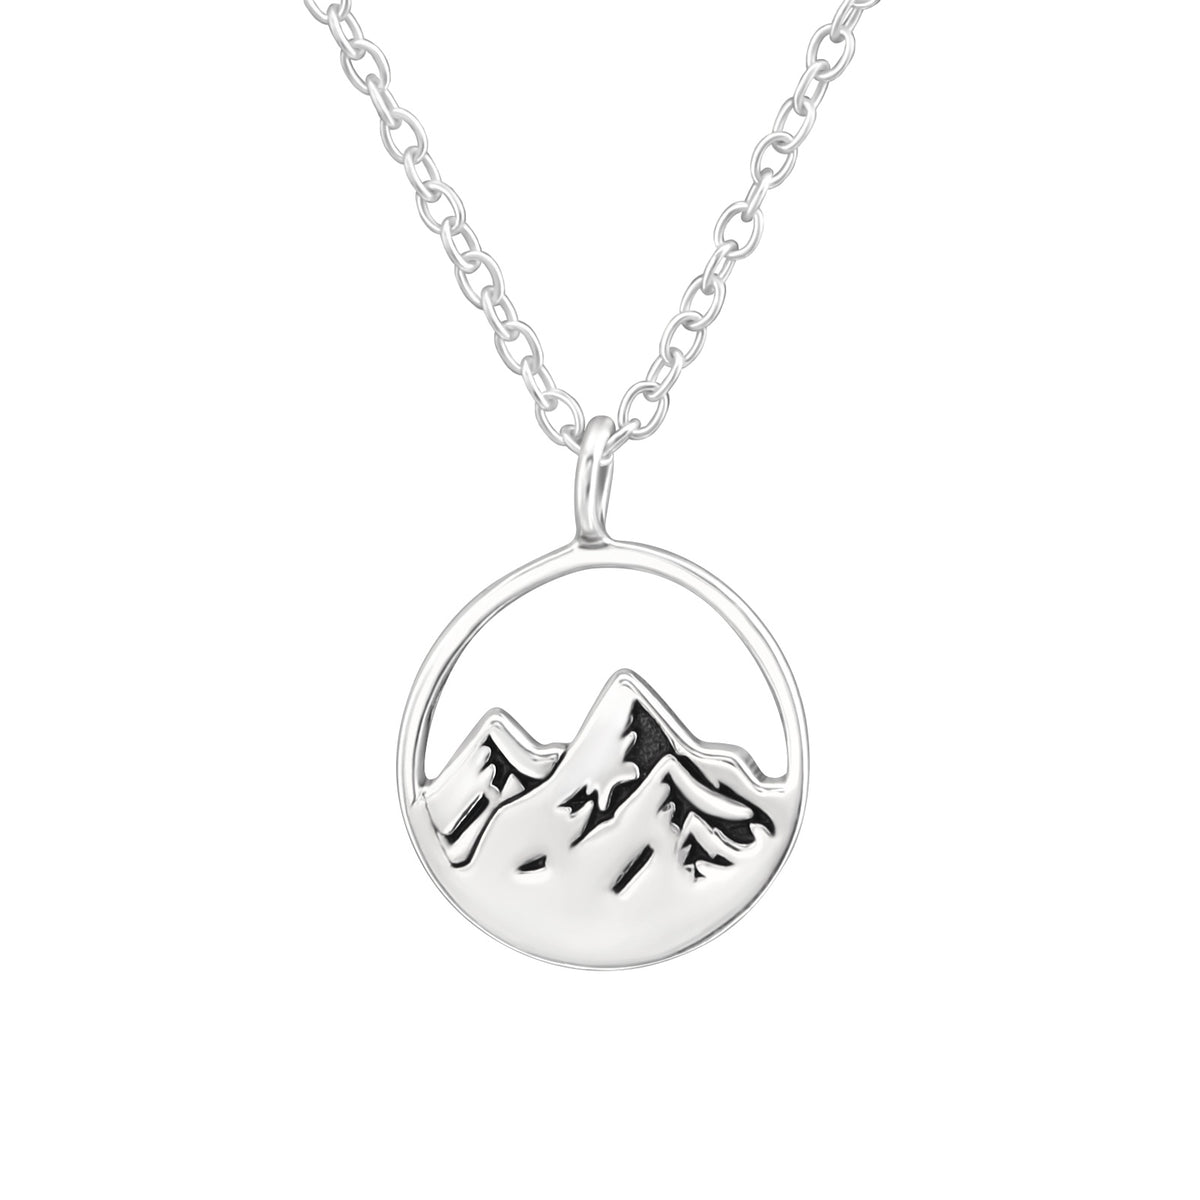 Buy Mountain Range Necklace in Sterling Silver Online in India - Etsy